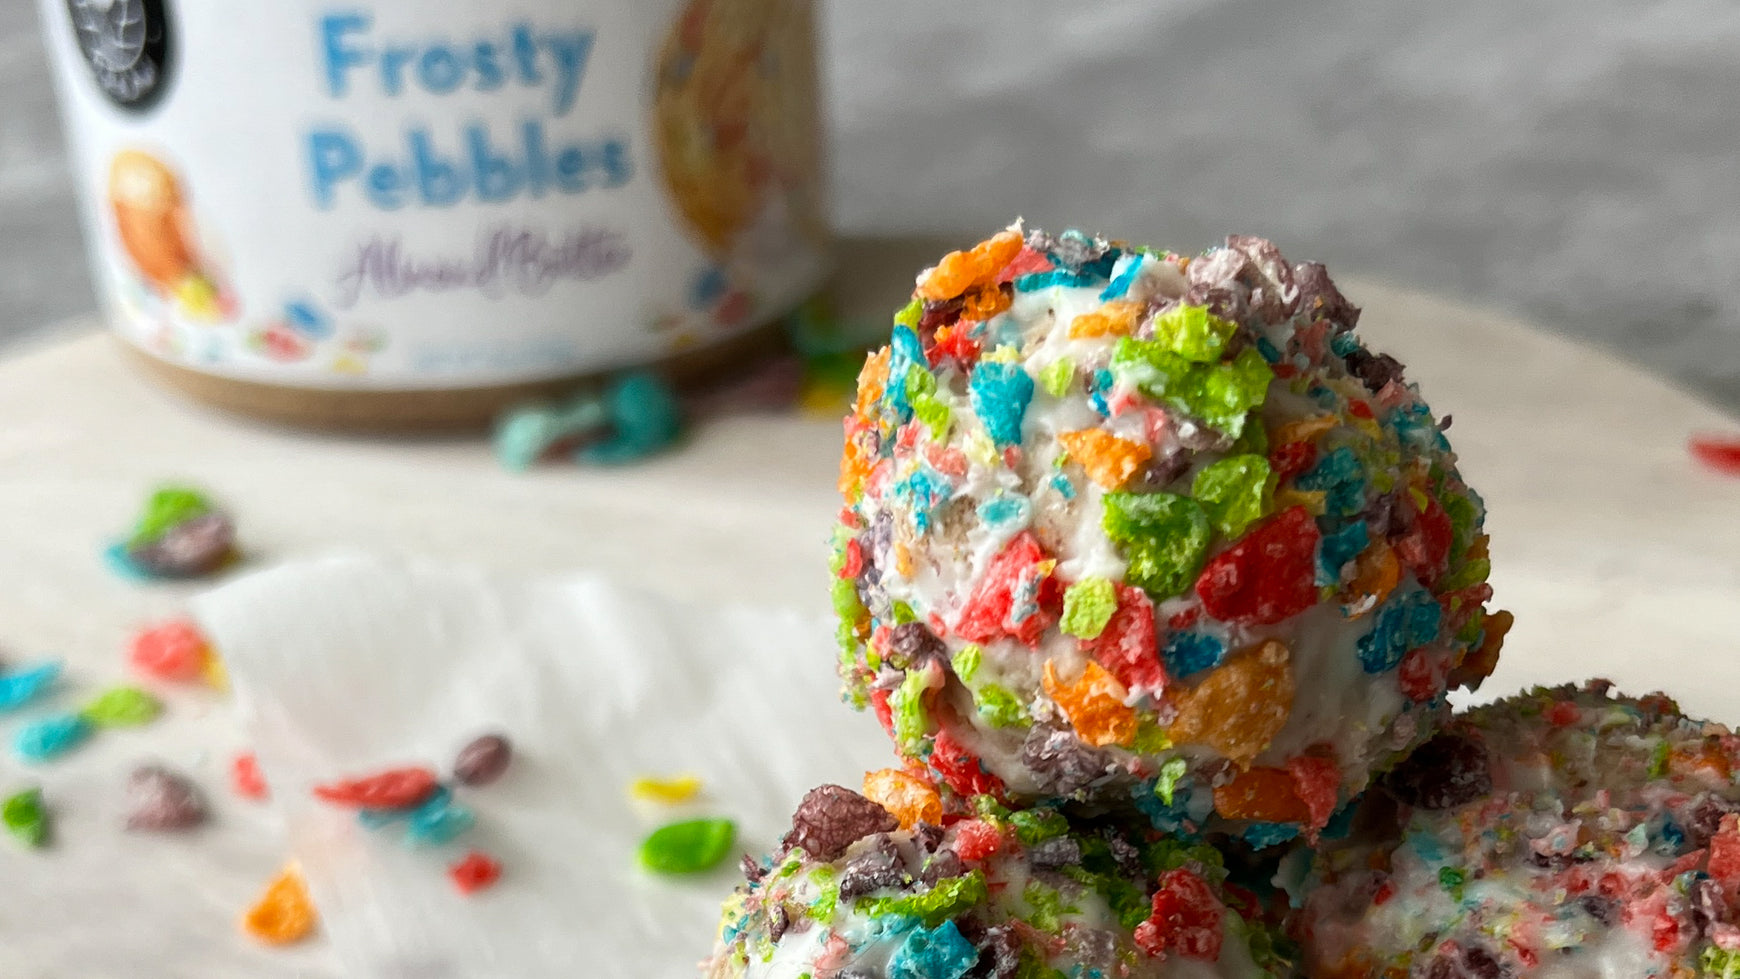 Frosty Pebbles Protein Cake Pops (No Bake!)